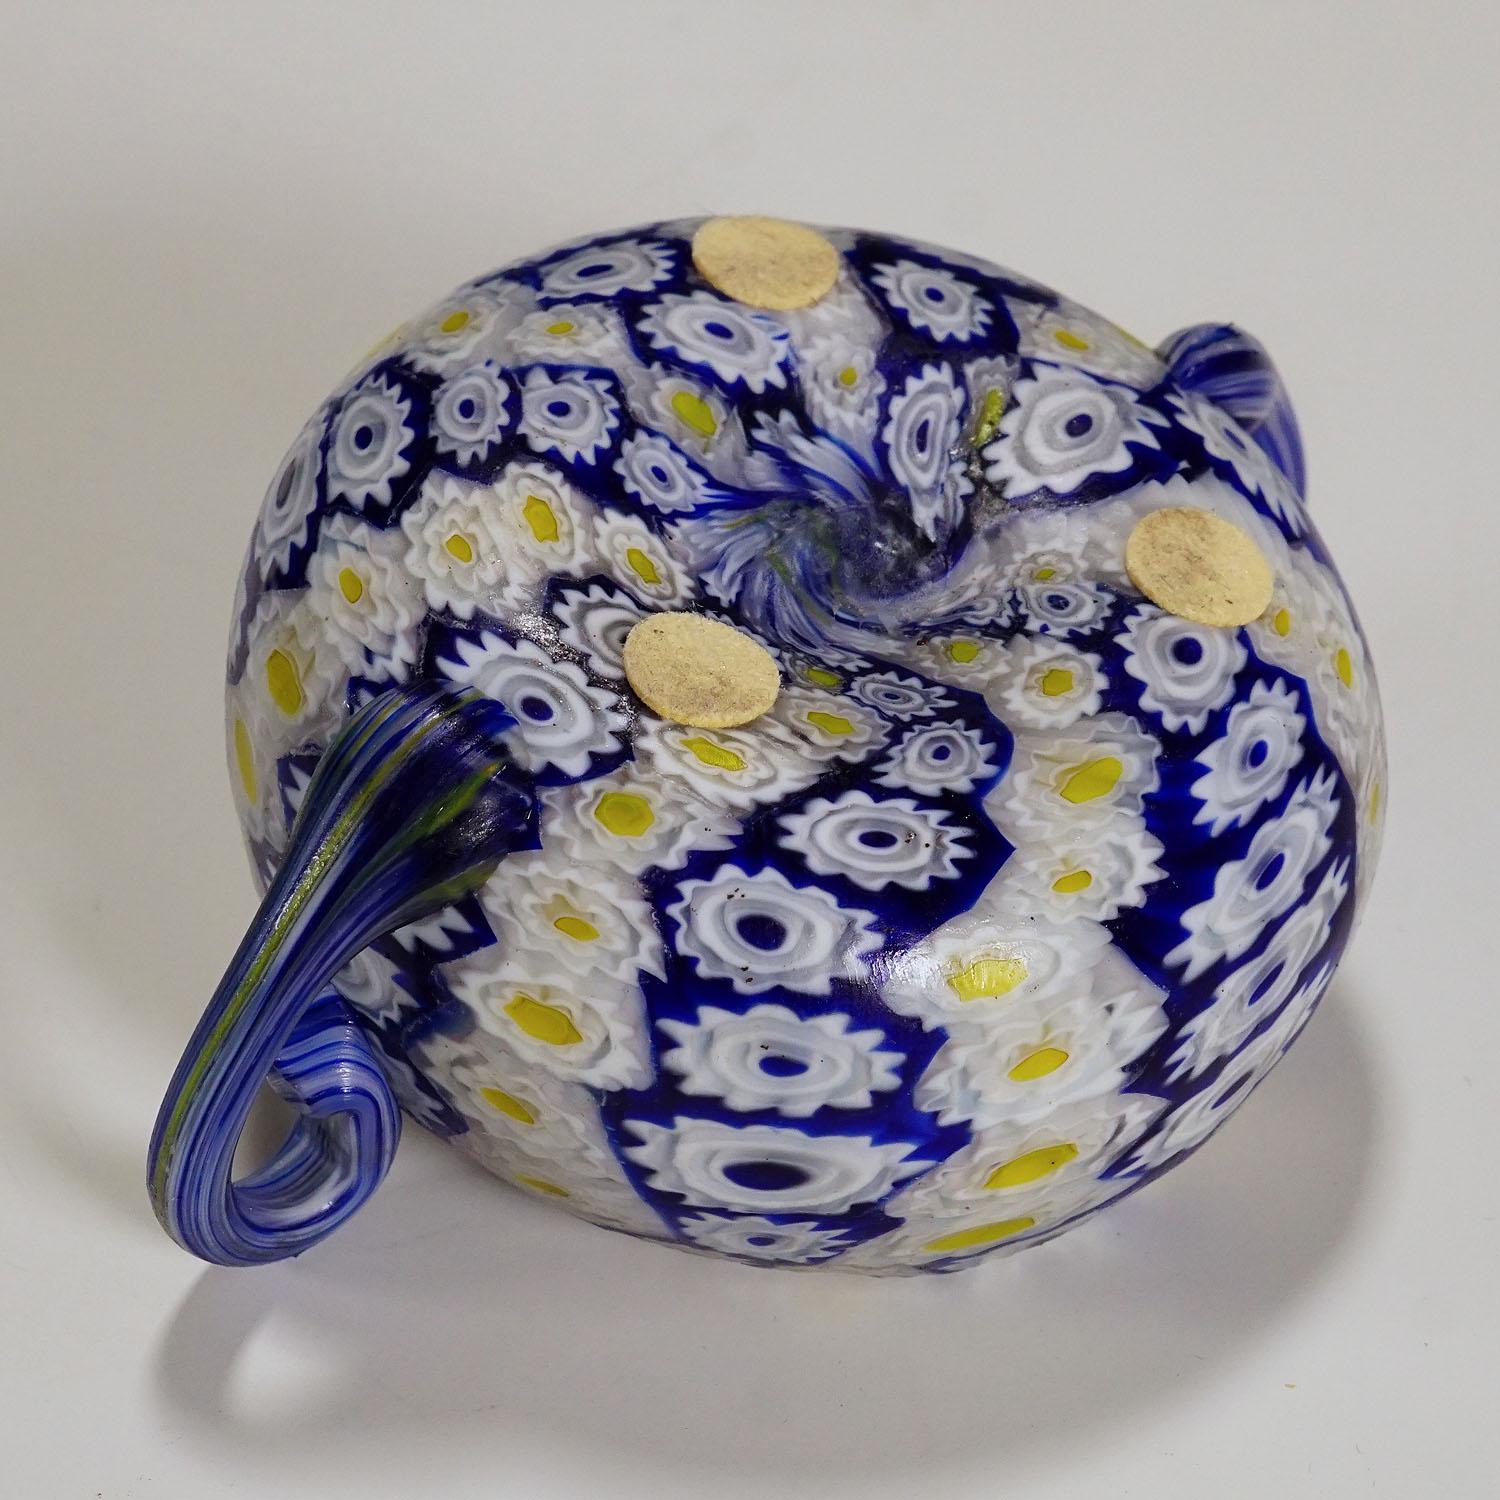 20th Century Antique Millefiori Bowl in Blue, Yellow and White, Fratelli Toso Murano 1910 For Sale